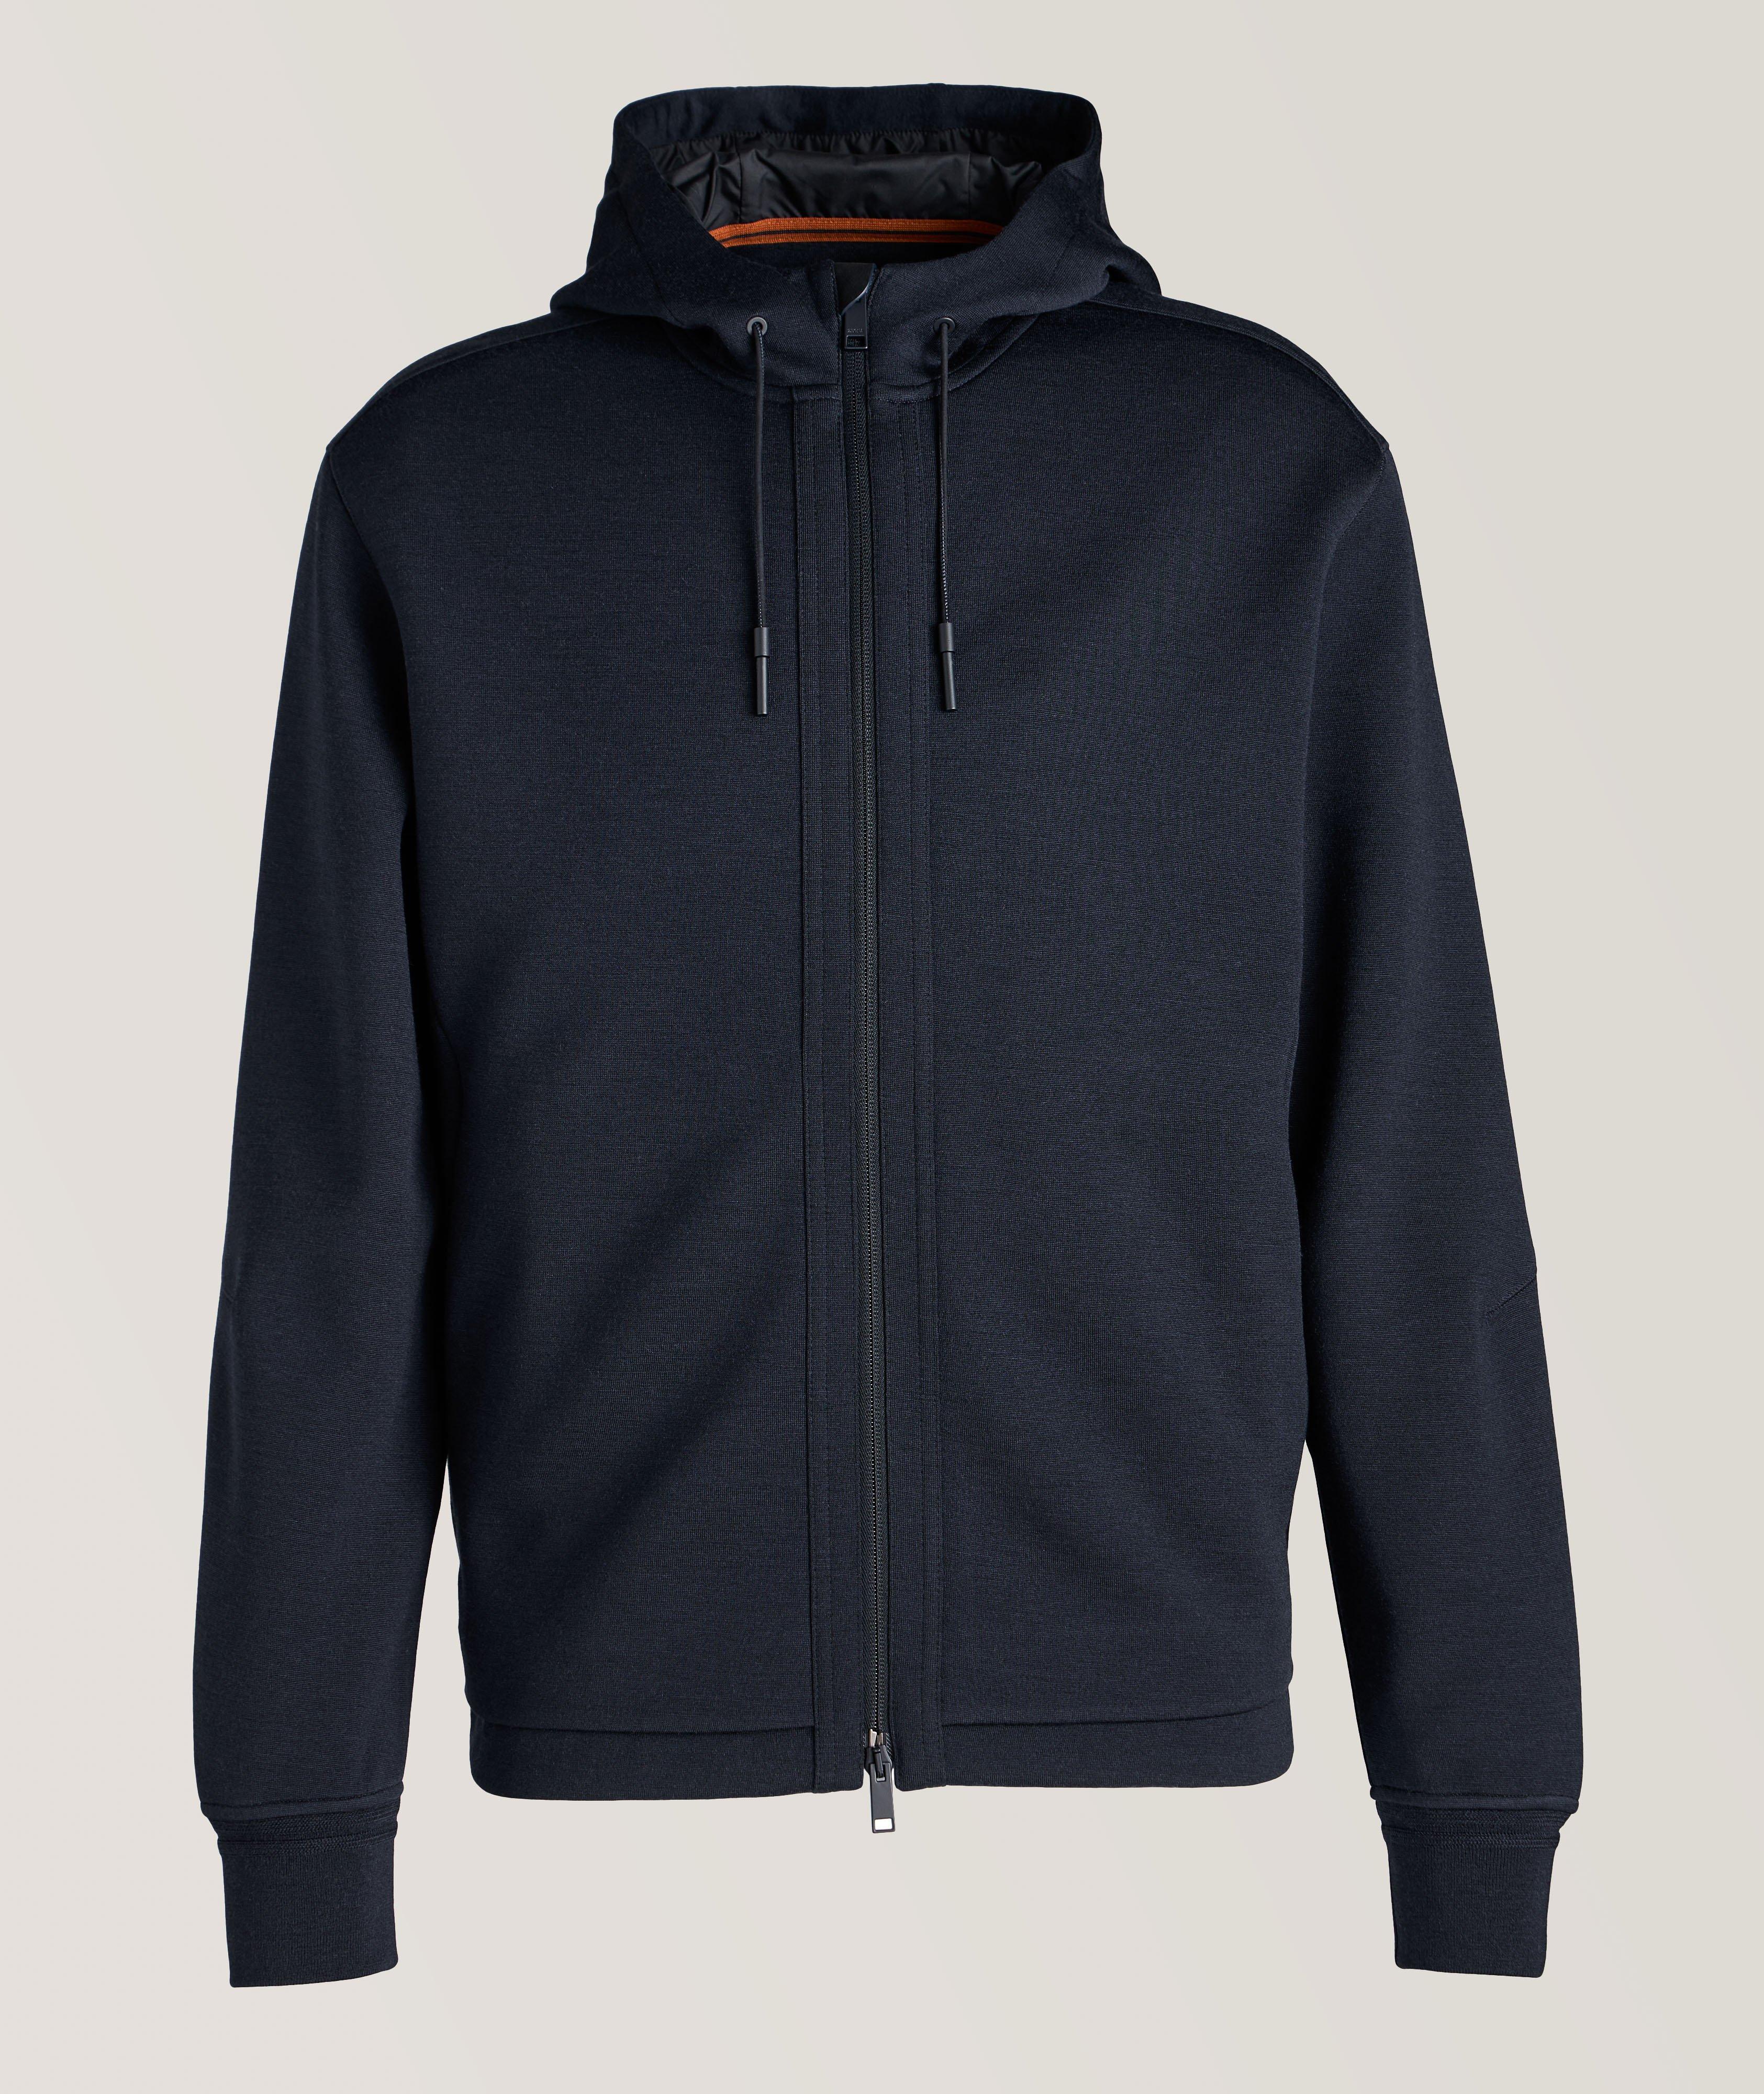 Full-Zip High Performance Hooded Sweater image 0